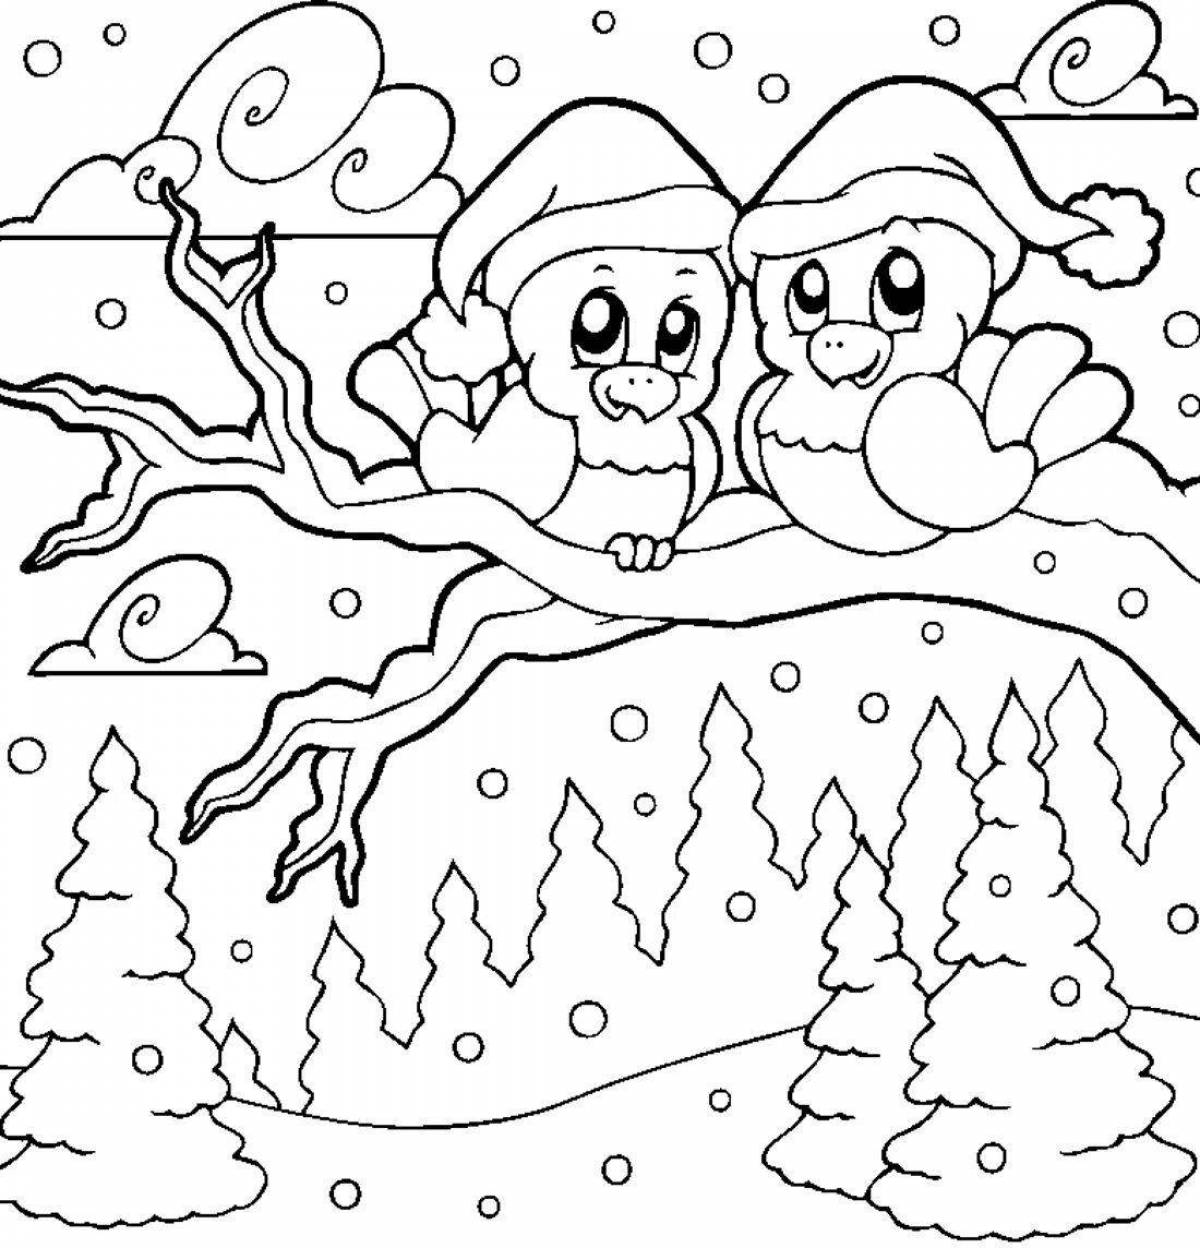 Sublime coloring page рисунок зима